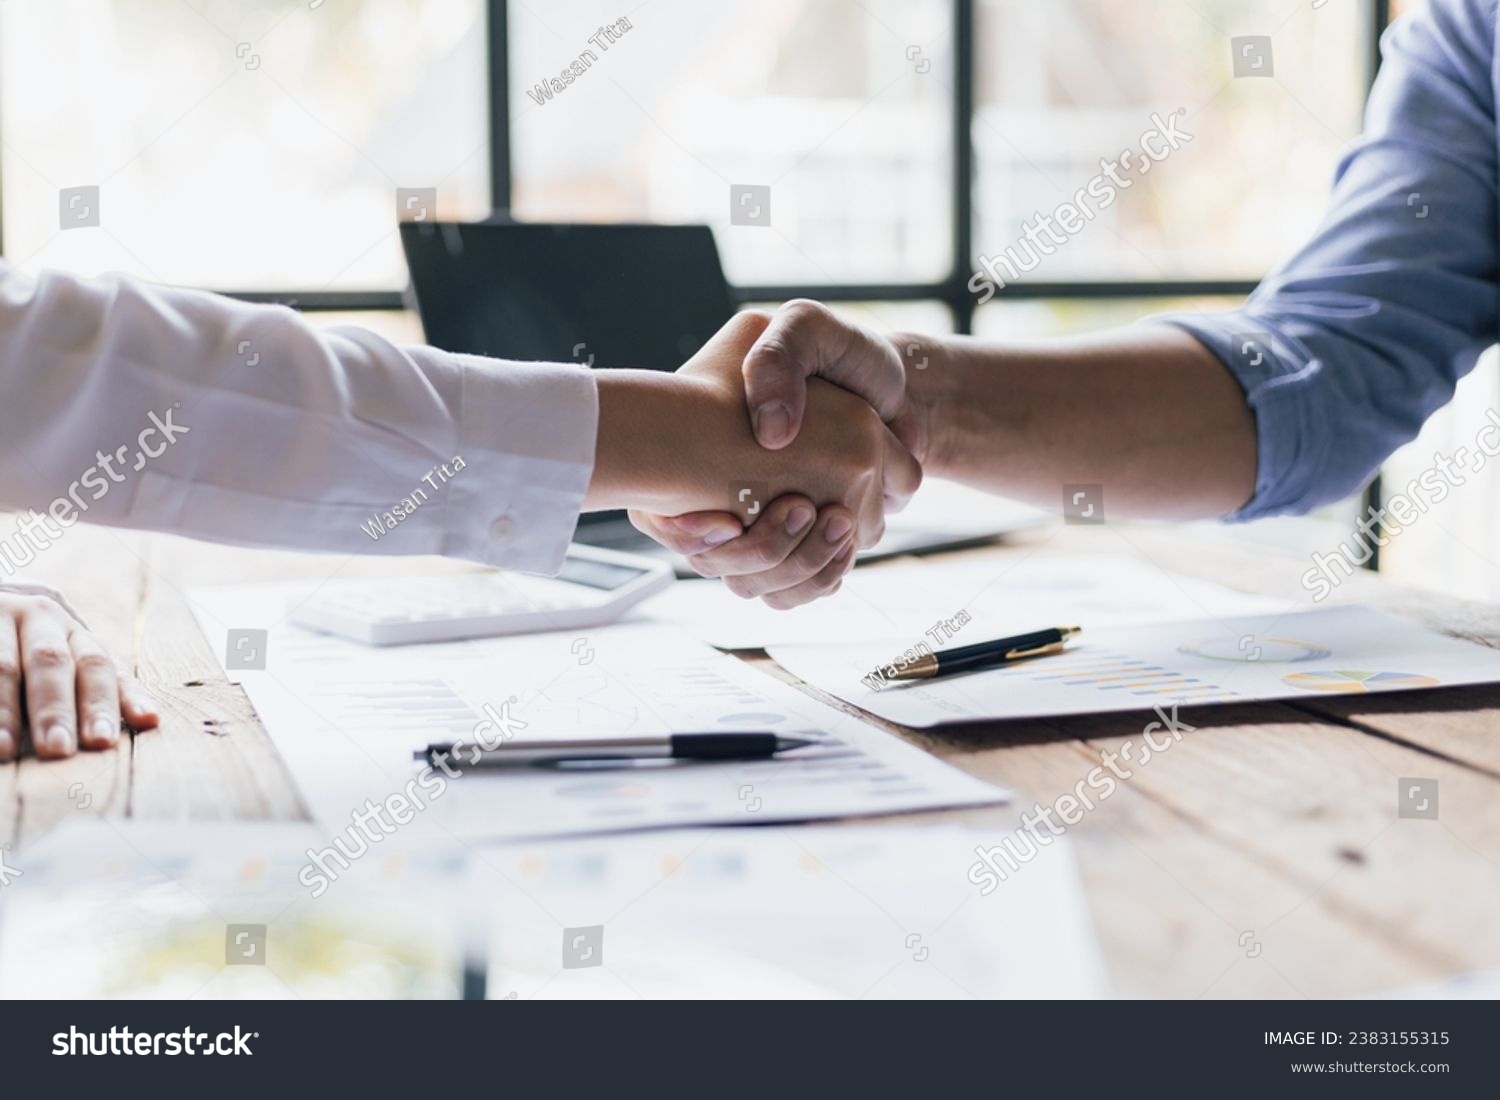 Business people shaking hands in business partnership meeting. #2383155315